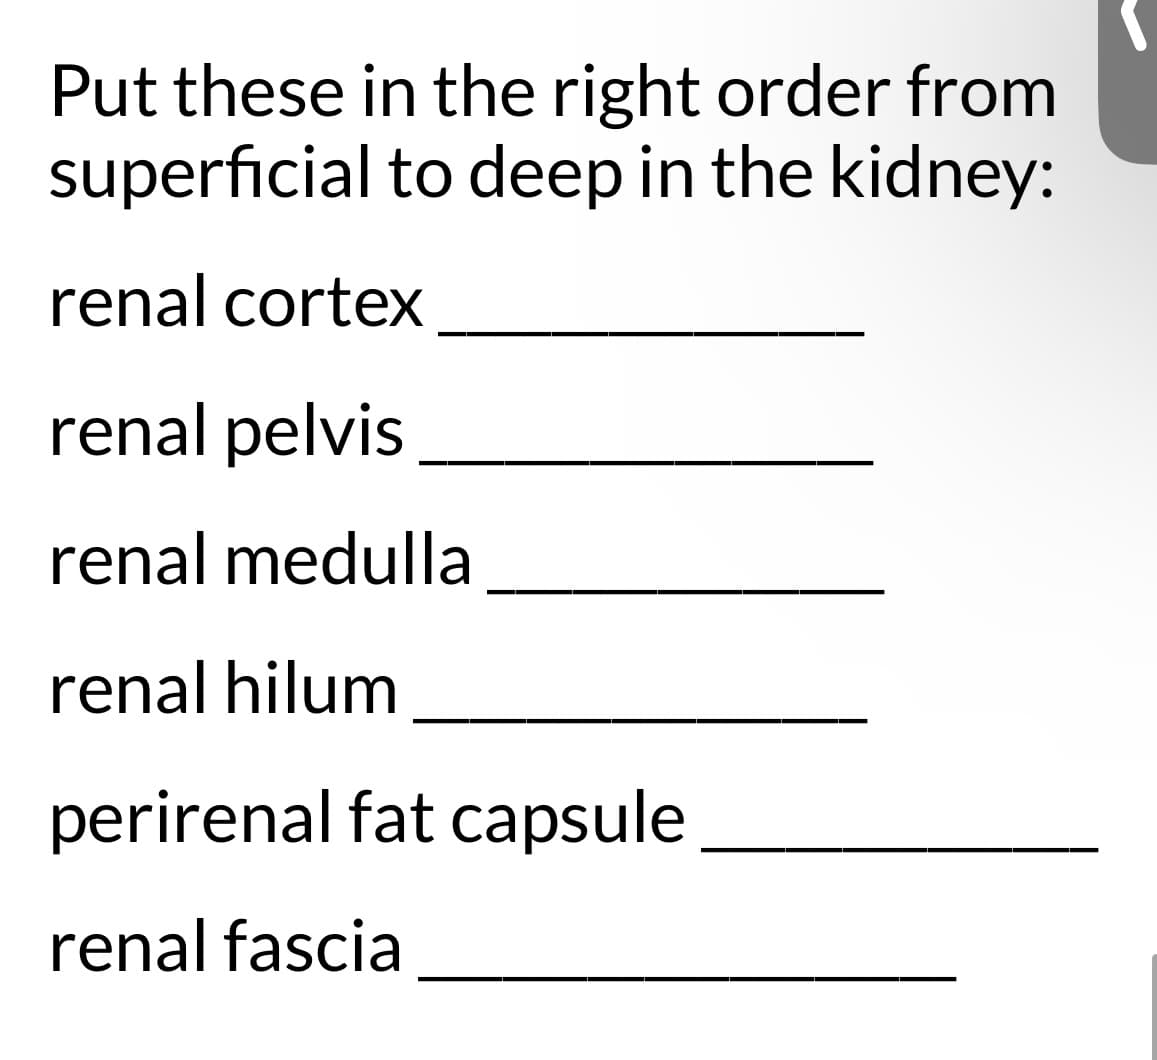 Put these in the right order from
superficial to deep in the kidney:
renal cortex
renal pelvis
renal medulla
renal hilum
perirenal fat capsule
renal fascia